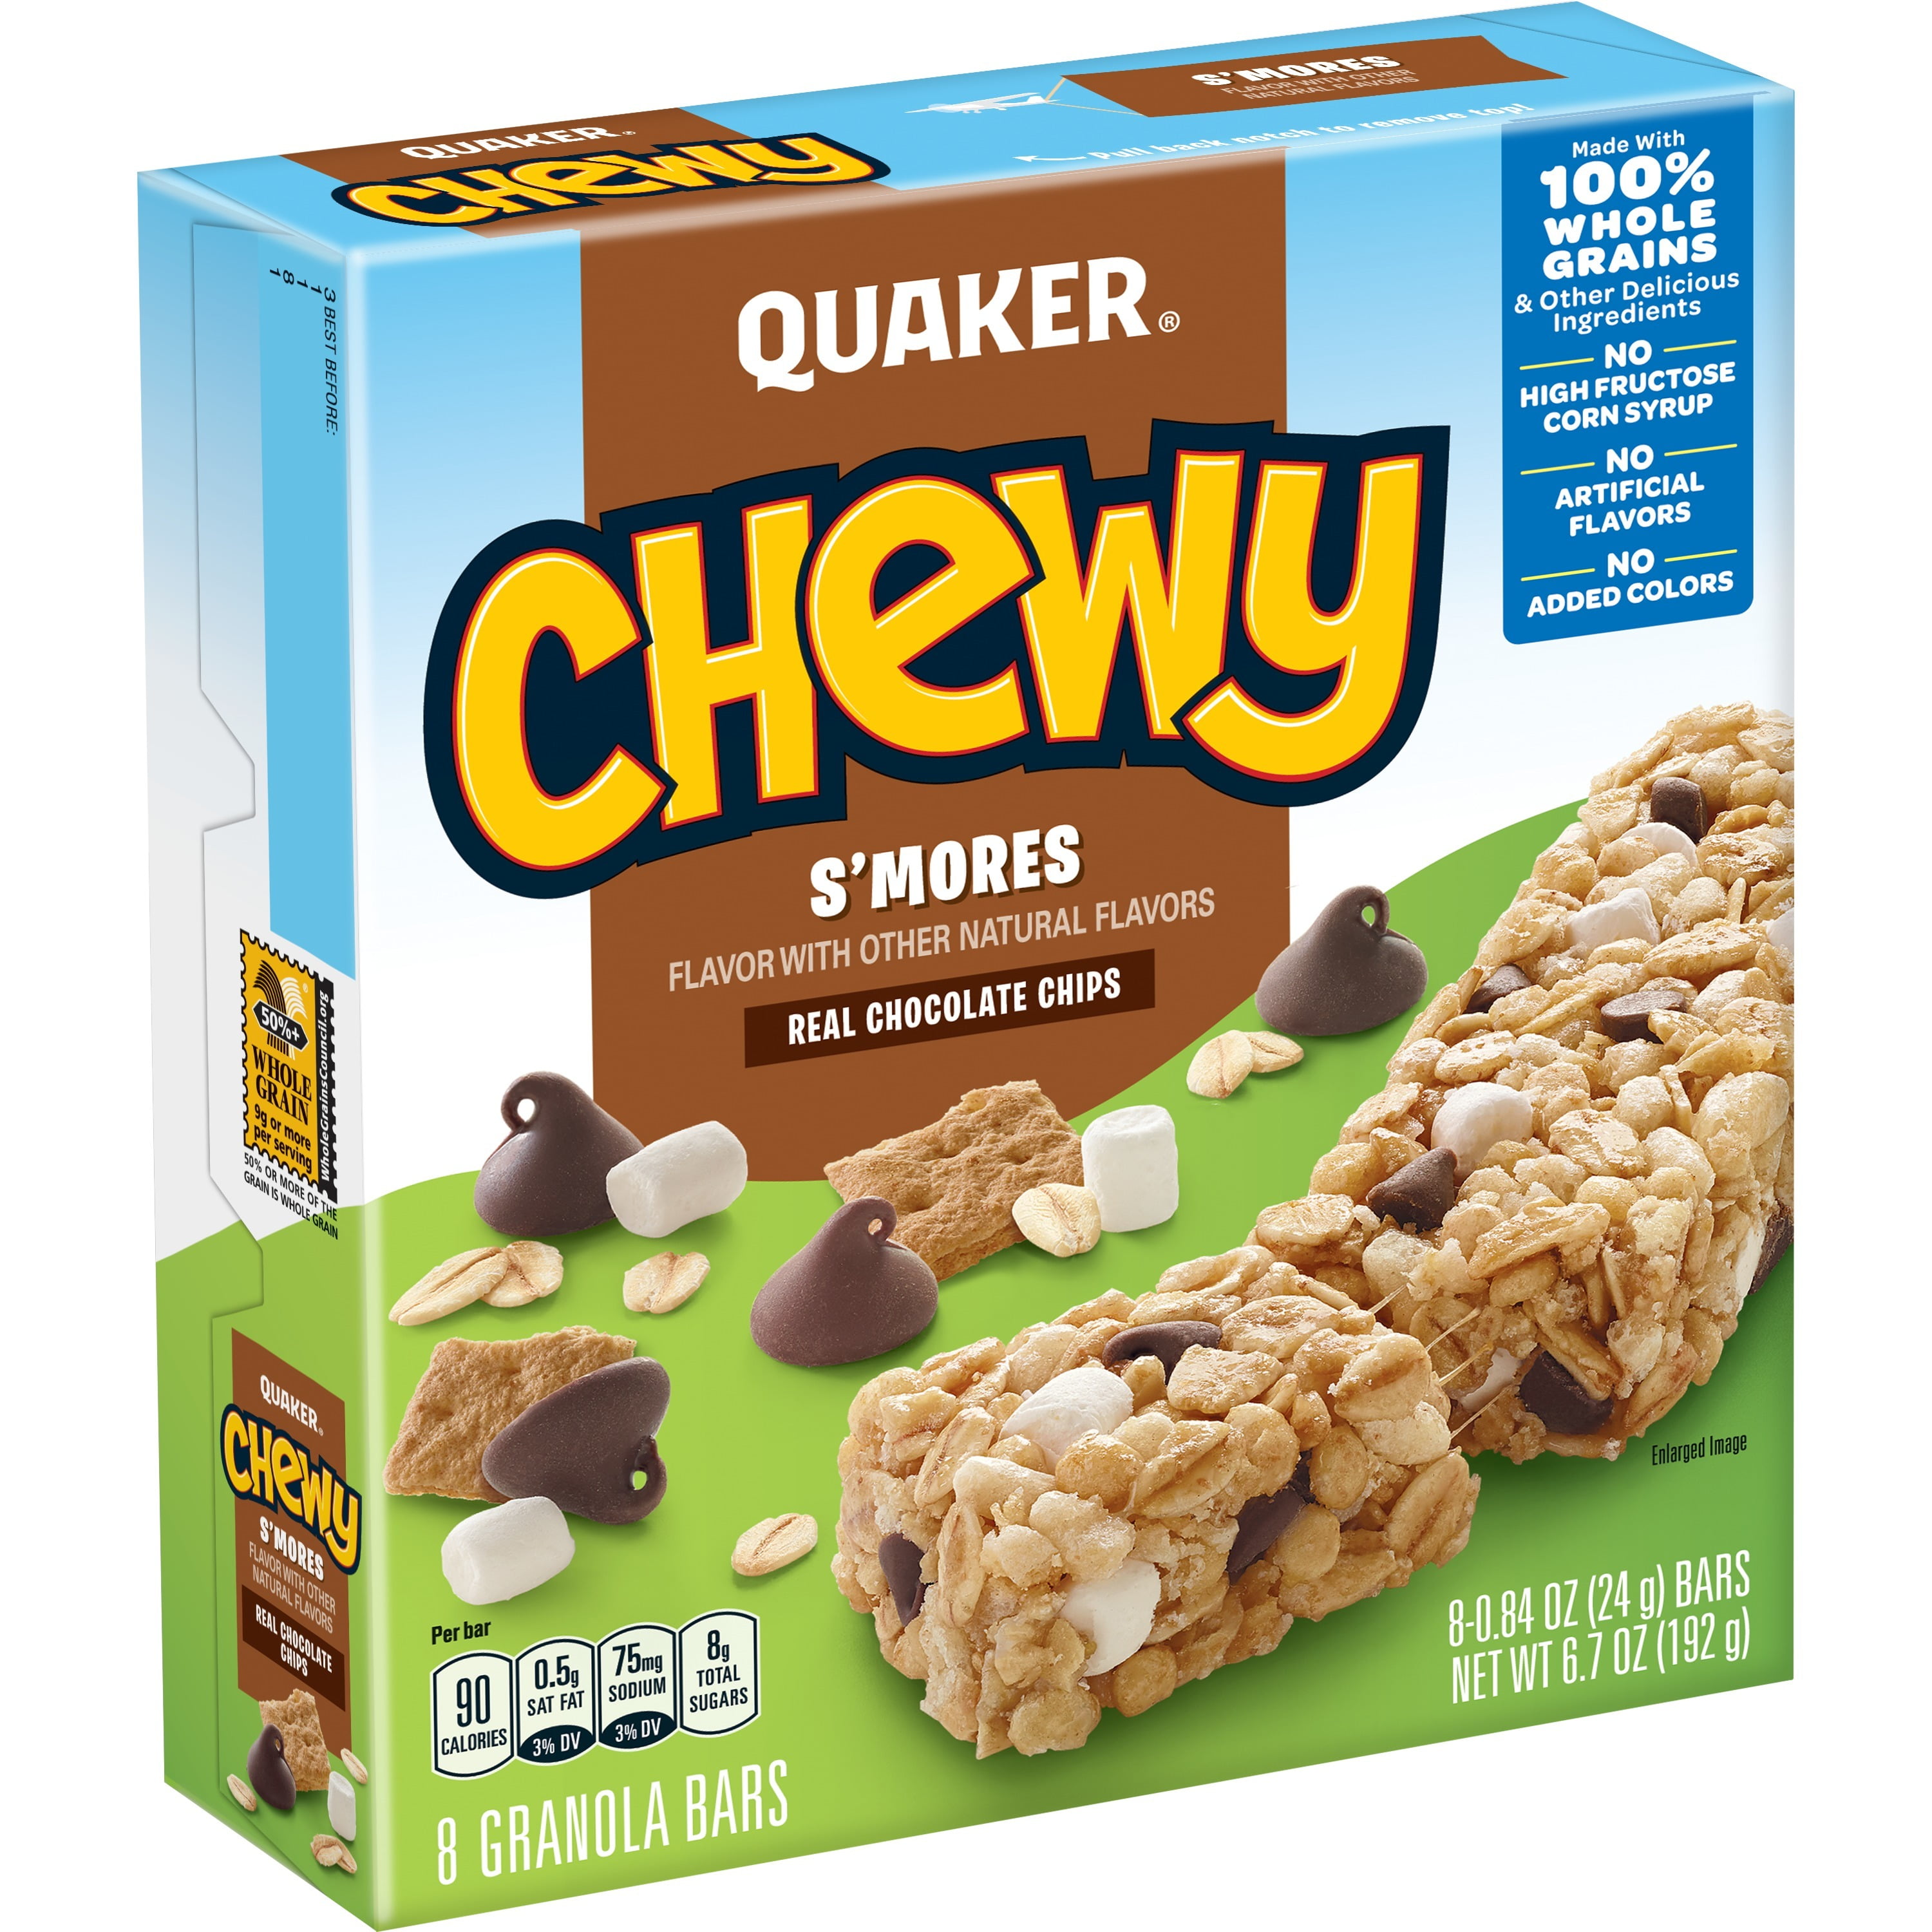 quaker-chewy-s-mores-8ct-walmart